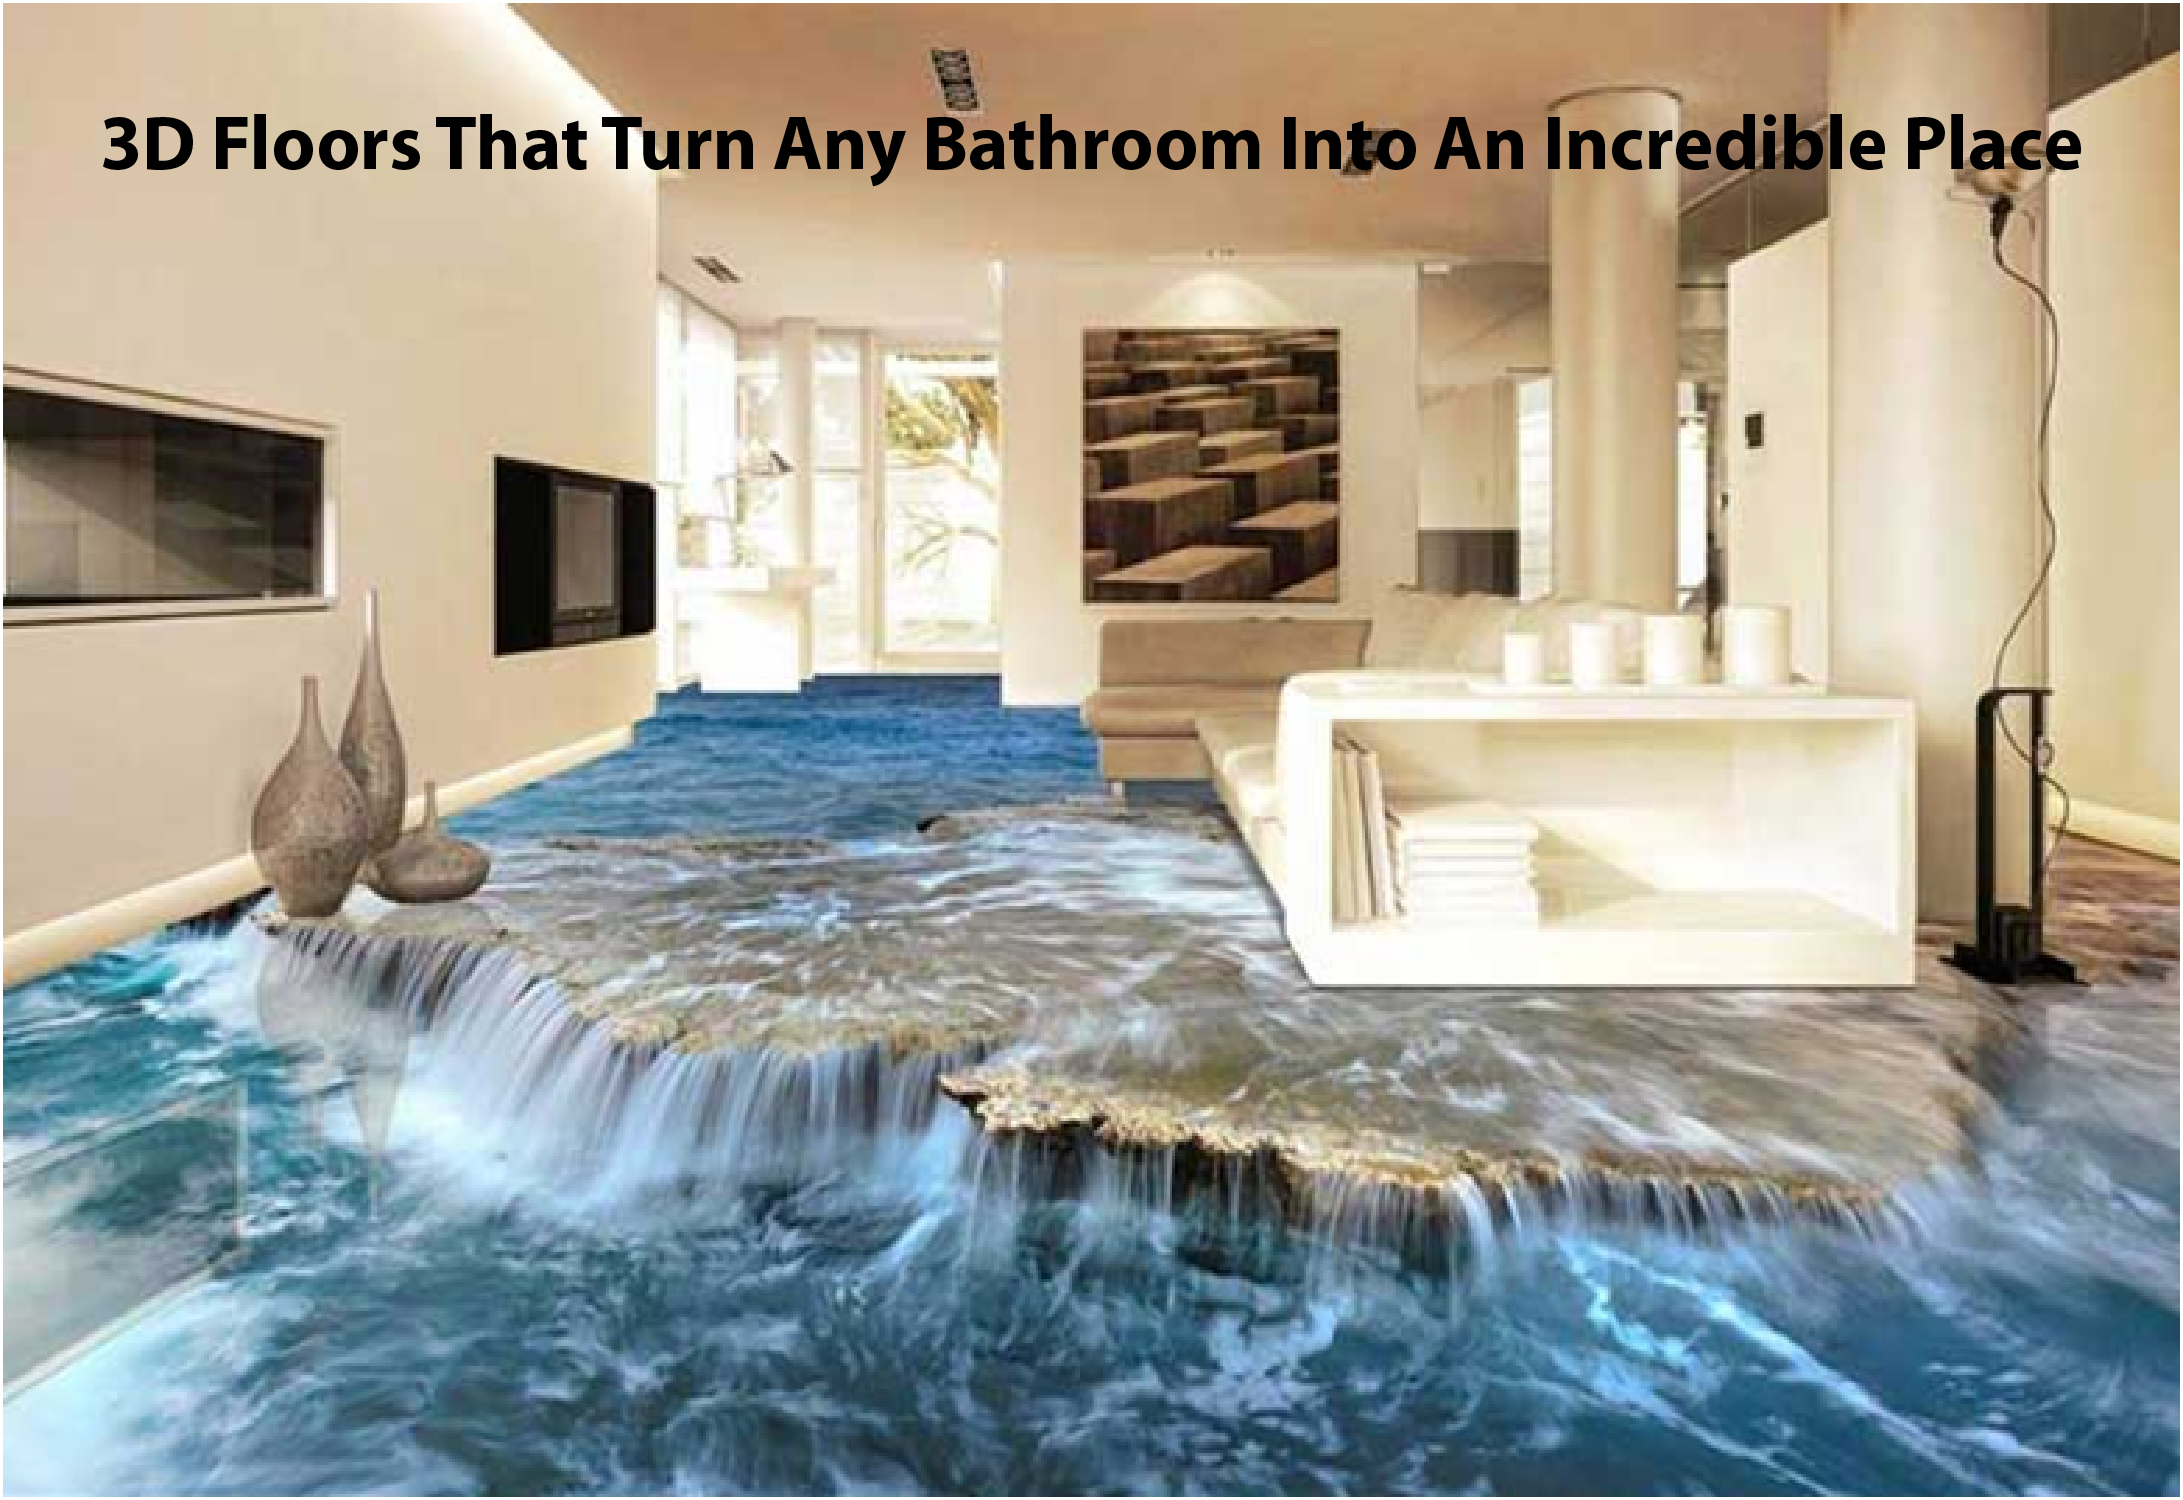 3D Floors That Turn Any Bathroom Into An Incredible Place